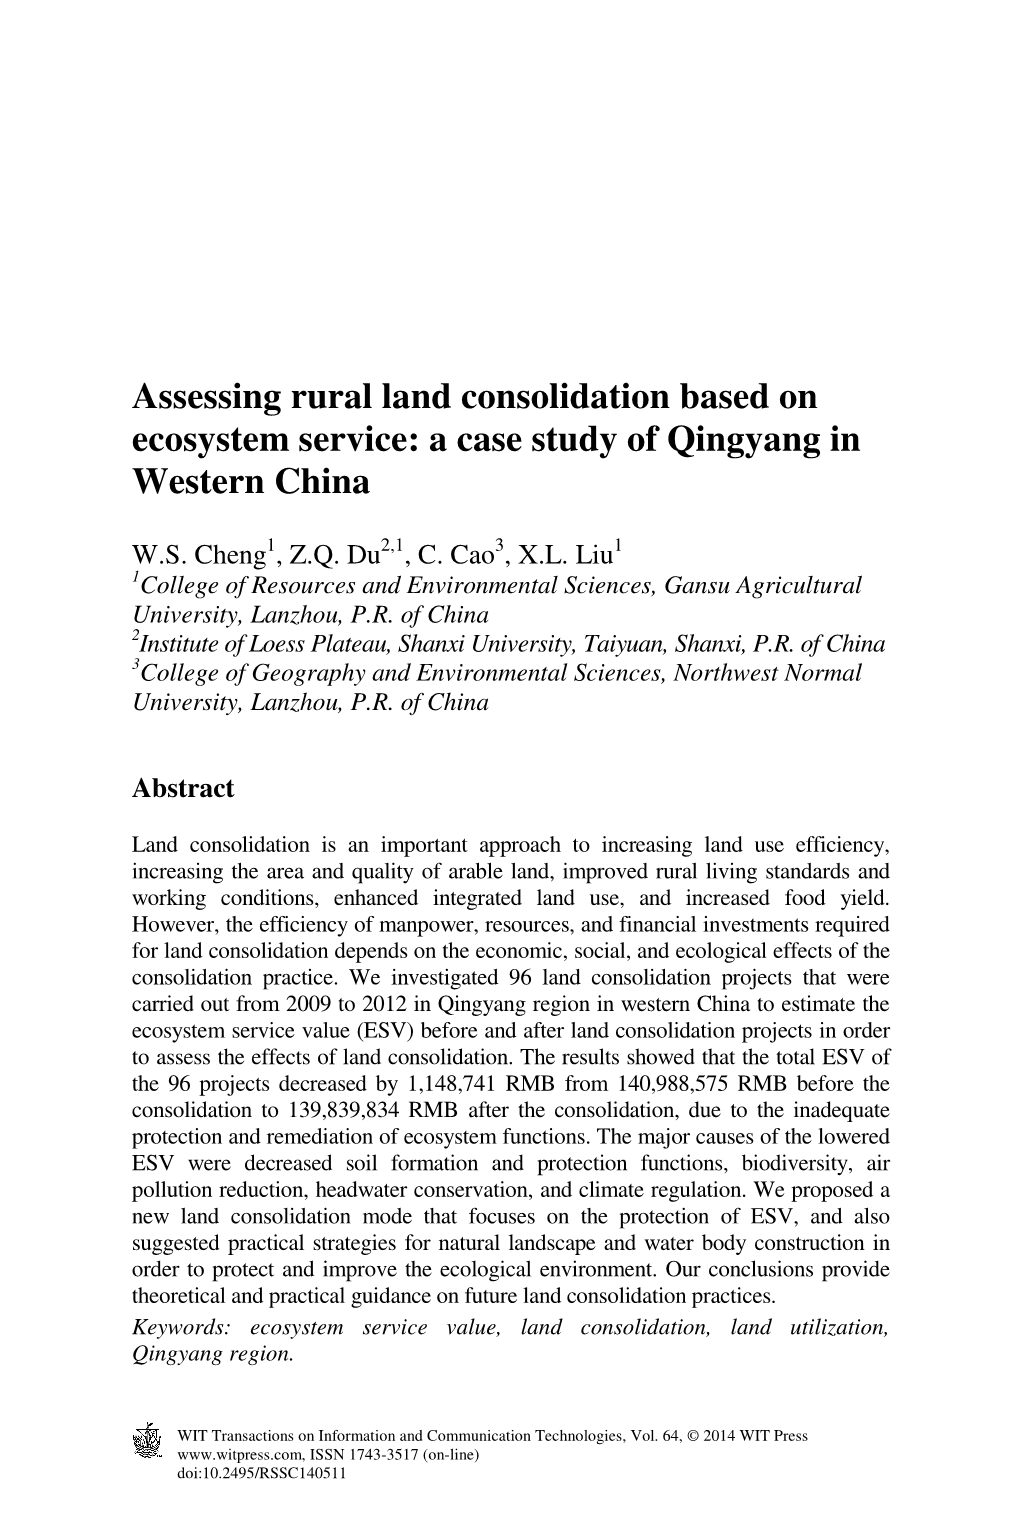 Assessing Rural Land Consolidation Based on Ecosystem Service: a Case Study of Qingyang in Western China